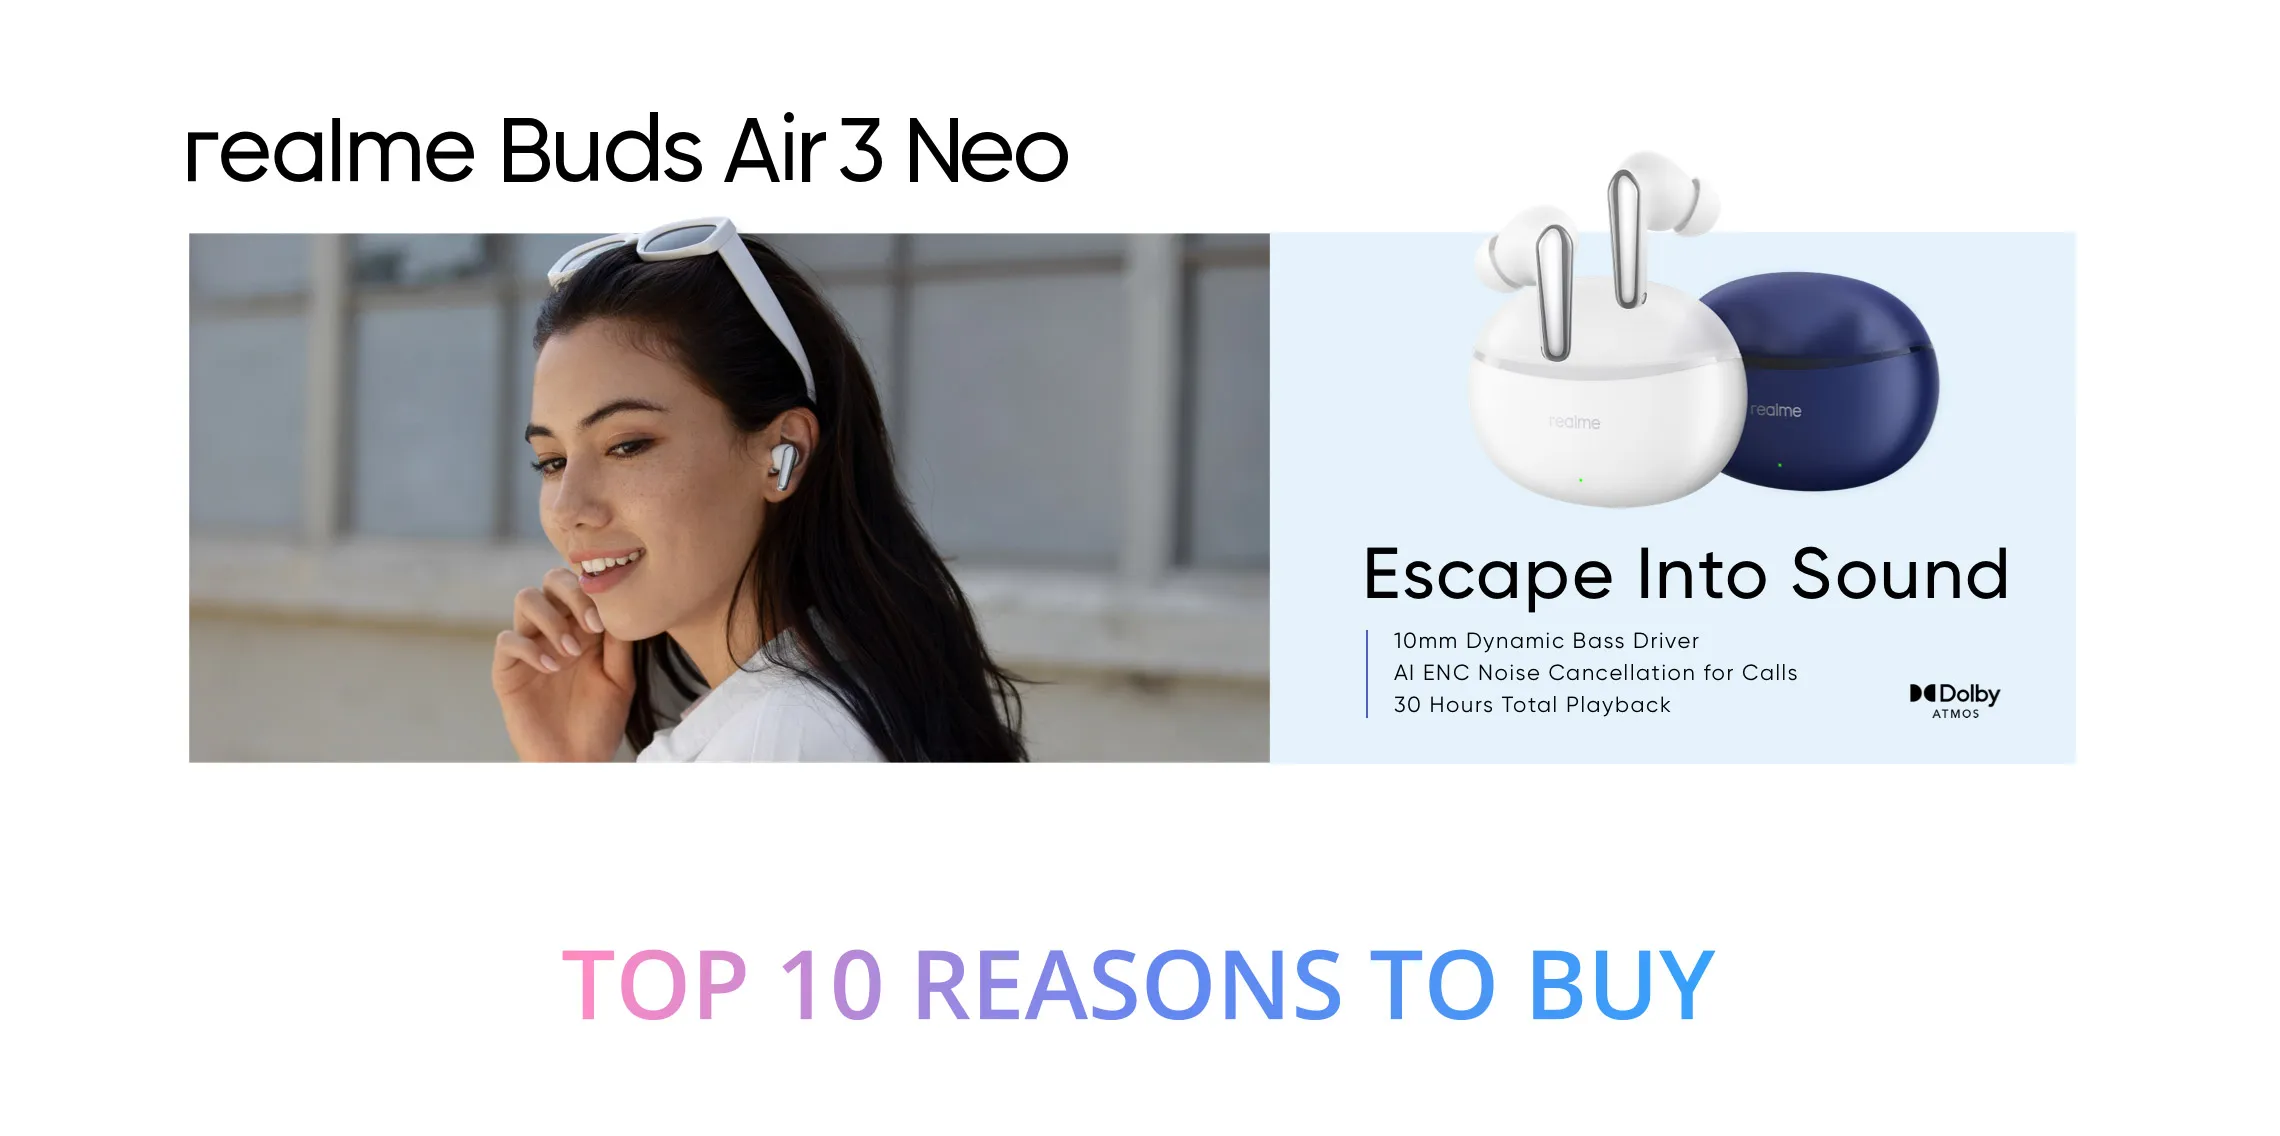 Realme Buds Air 3 Neo True Wireless Earbuds up to 30 hours Playback